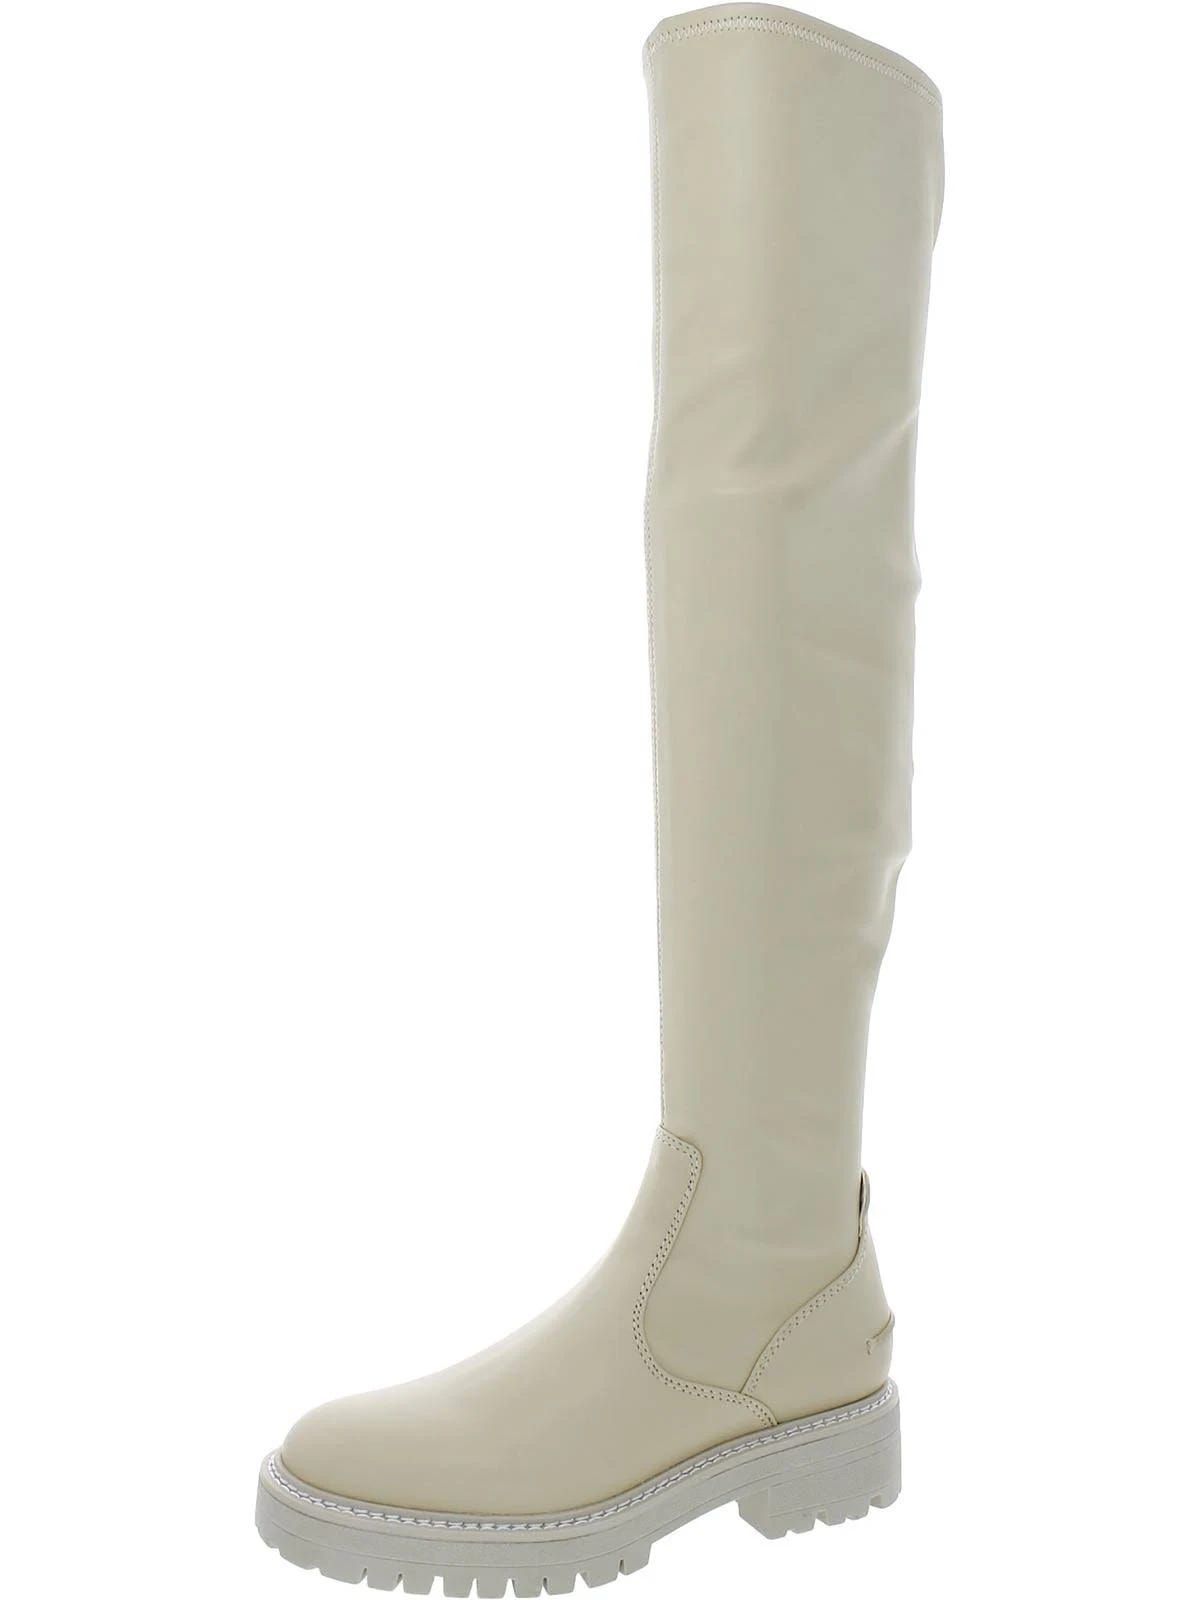 Polished Cream Faux Leather Over-the-Knee Boots | Image